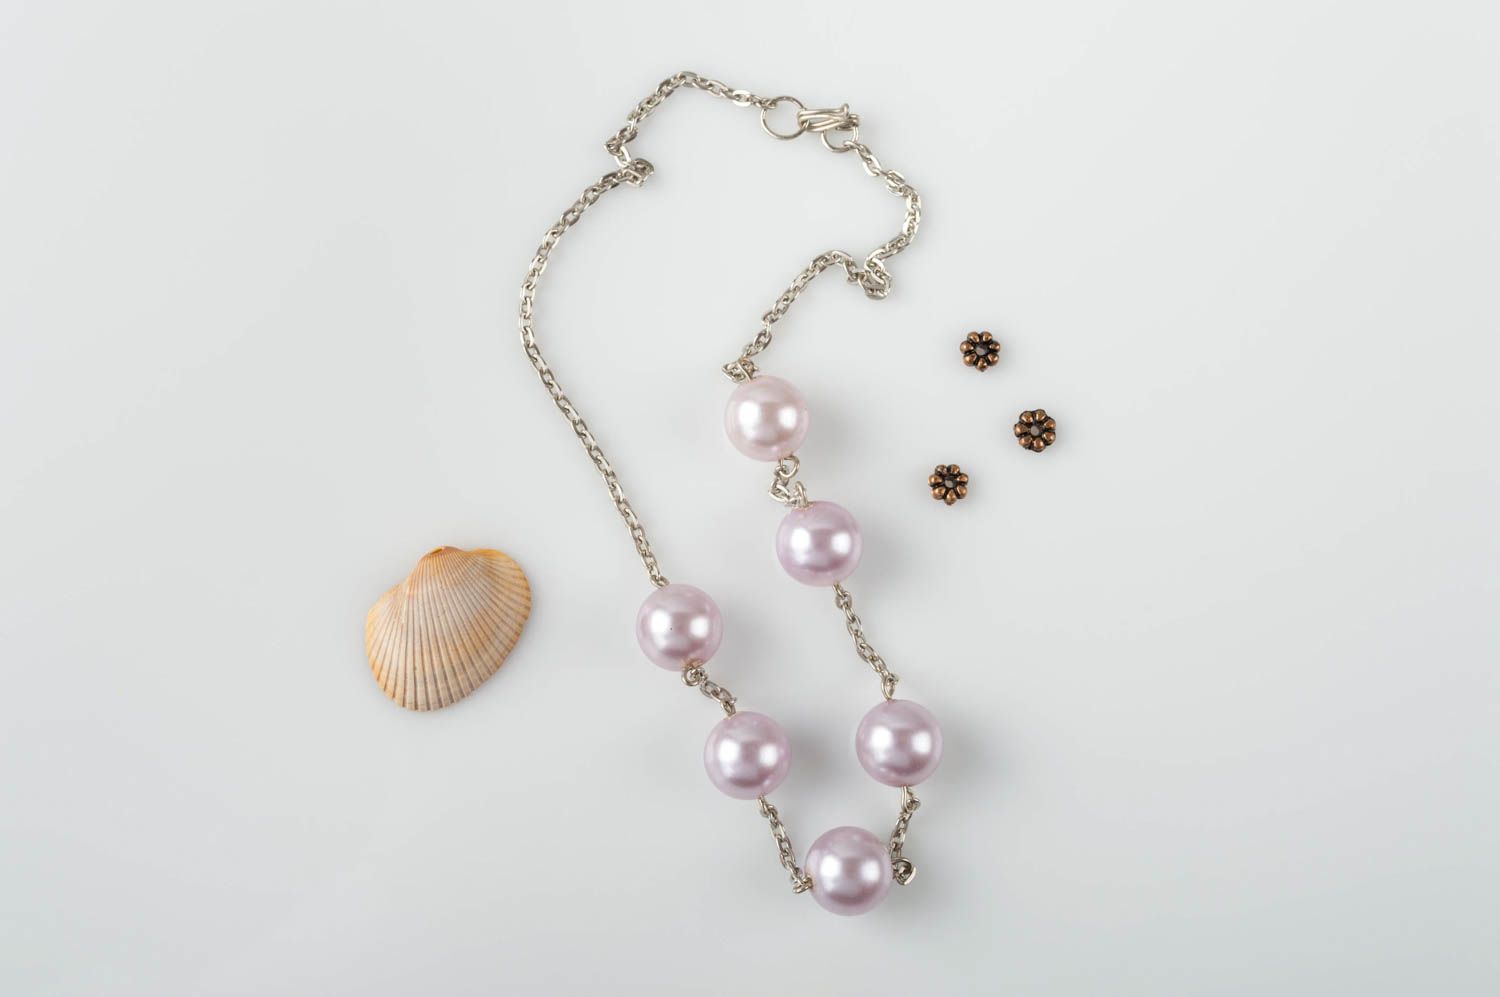 Handmade necklace accessory with artificial pearls stylish unusual jewelry photo 1